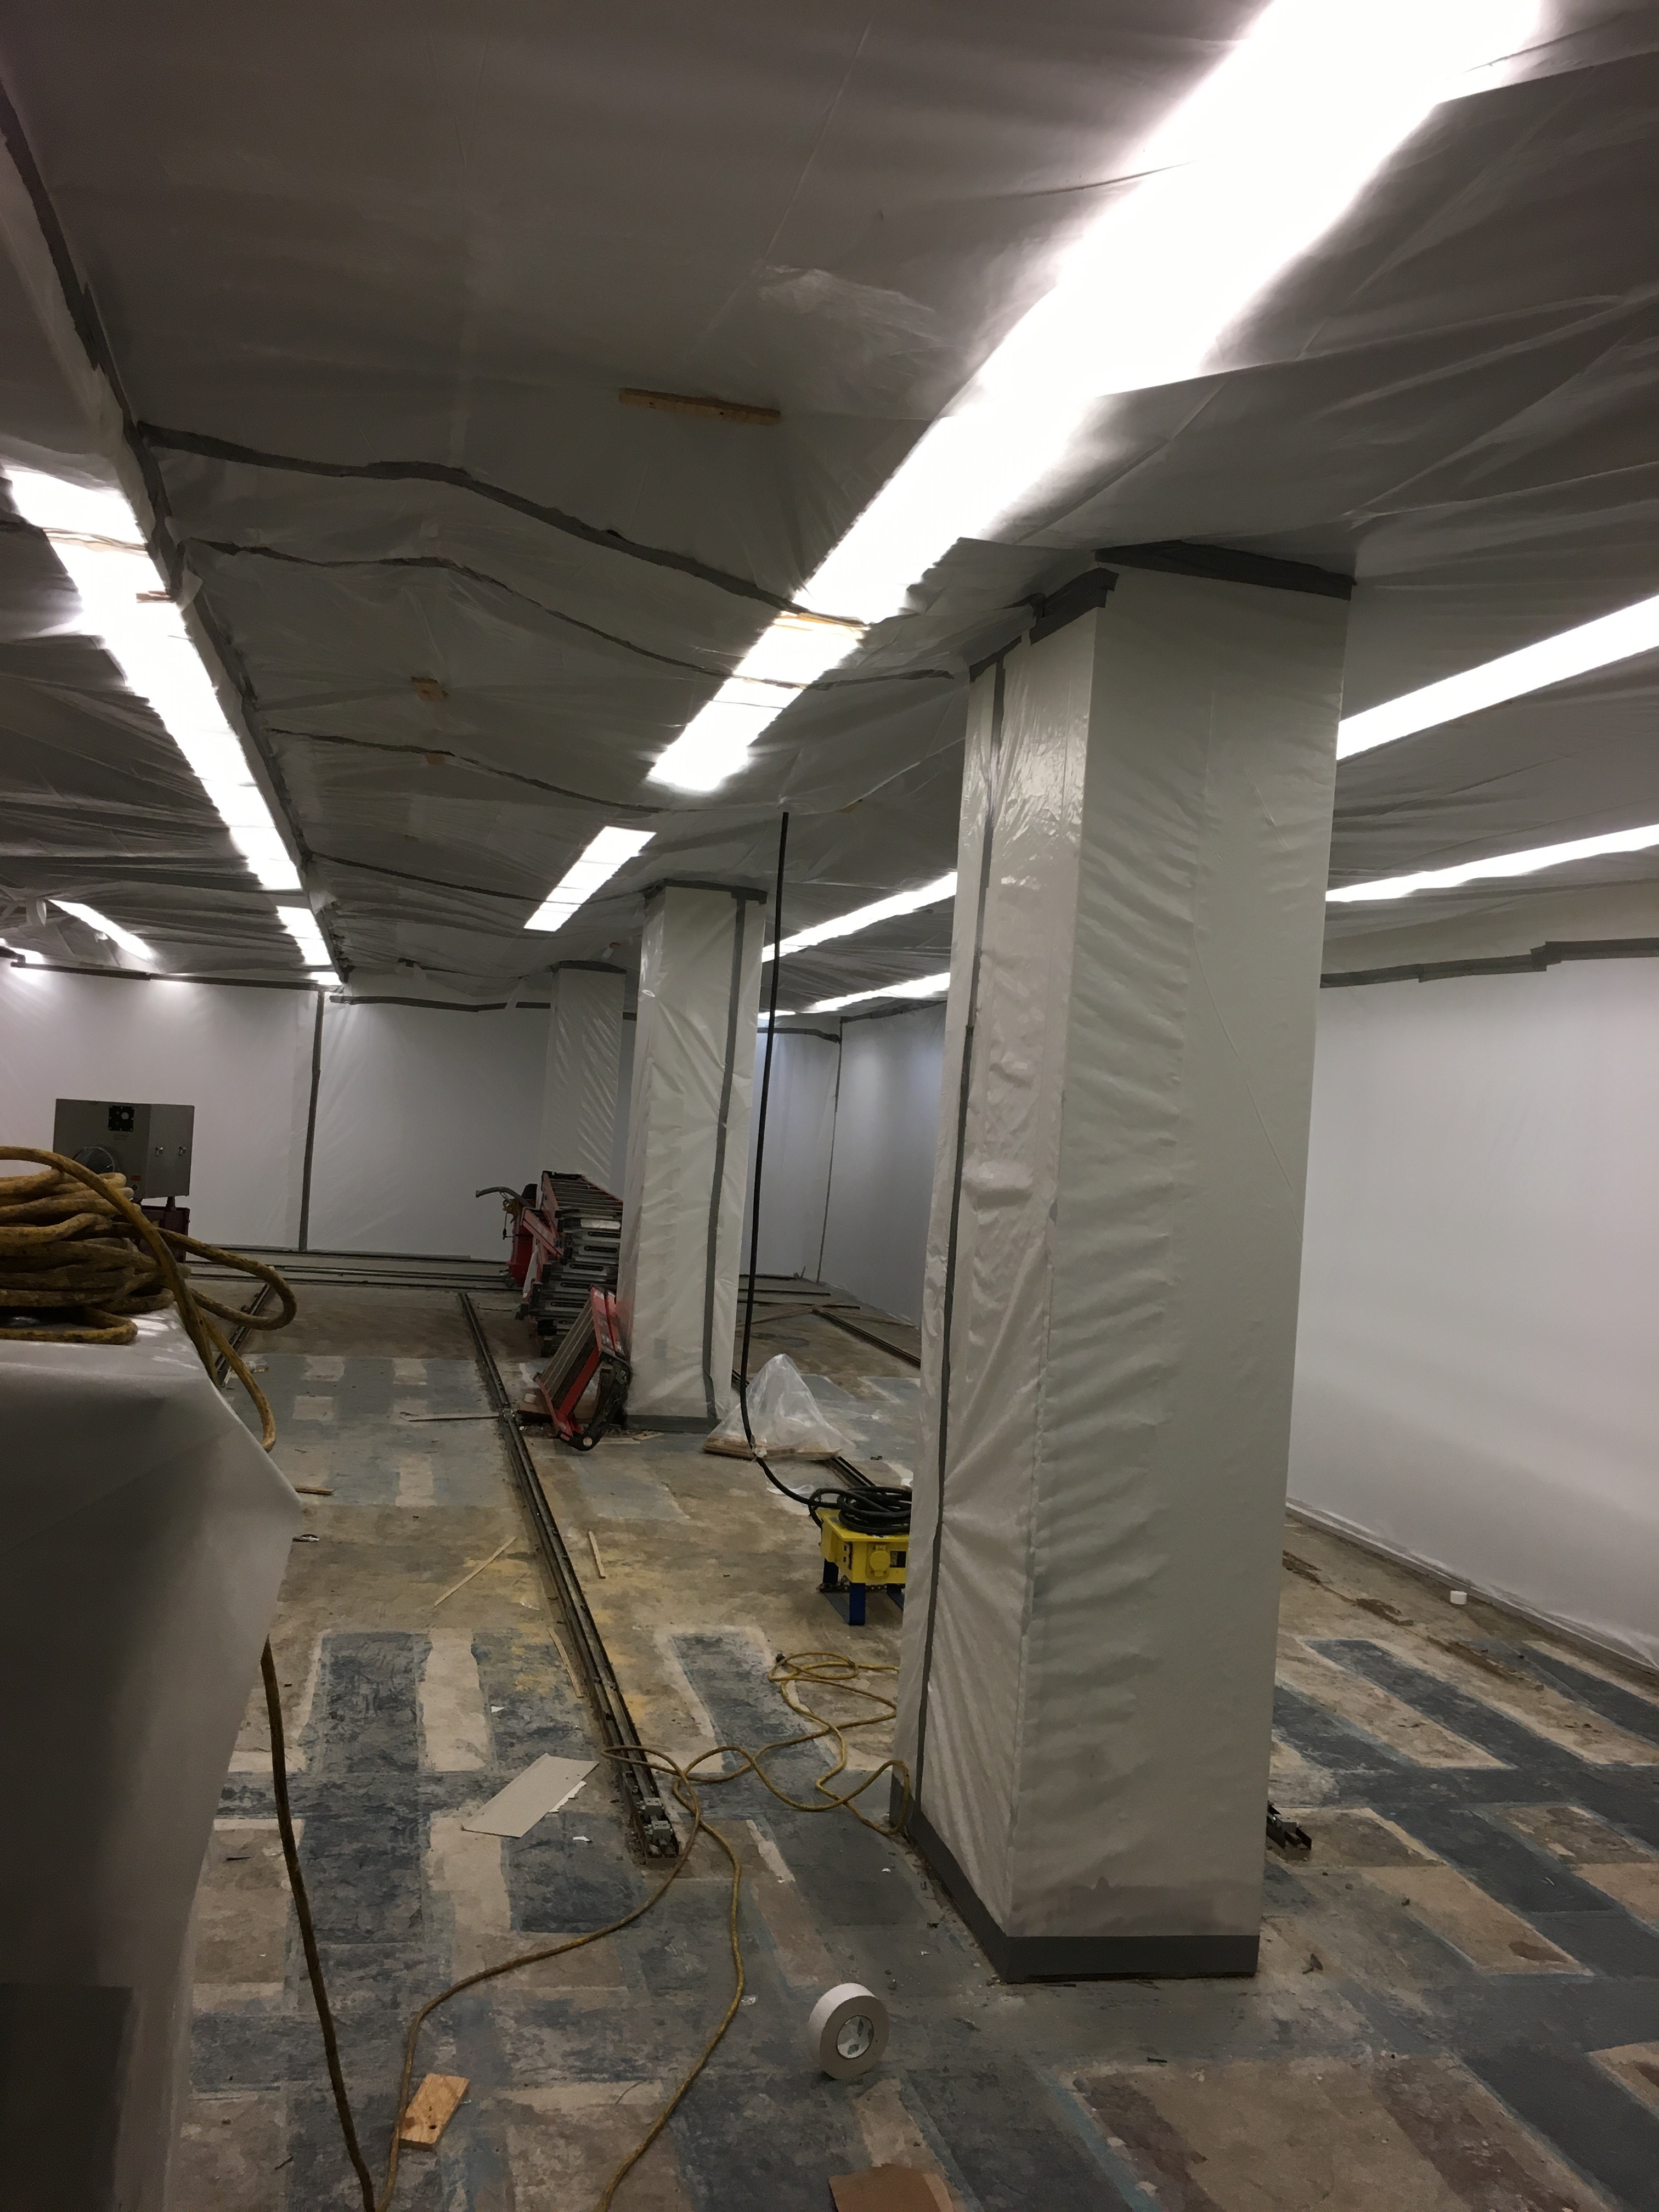 A view inside a containment for a decommissioning project showing plastic sheeting covering surfaces that will be preserved.